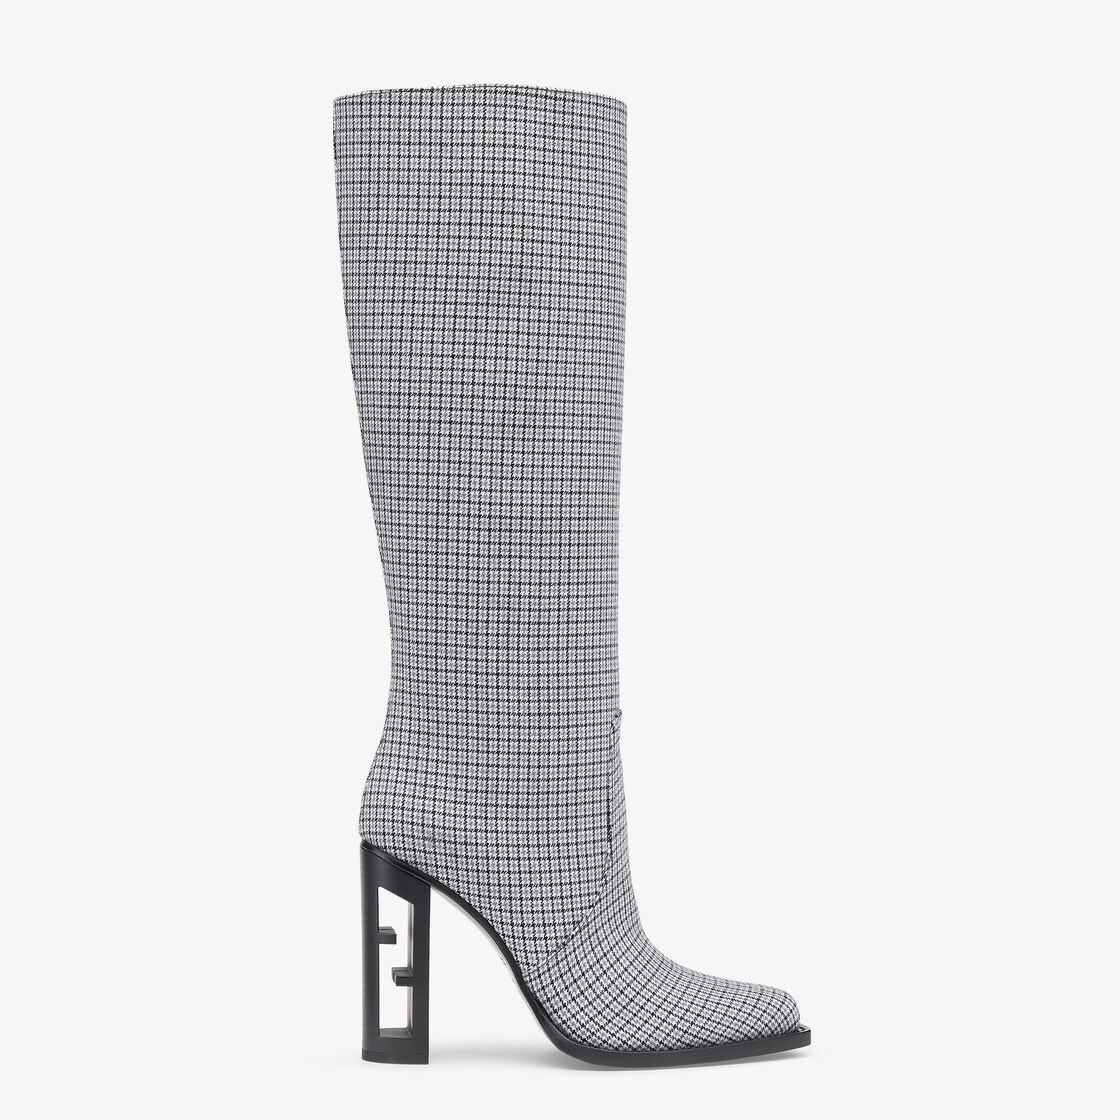 High-heeled boots in gray fabric - 1